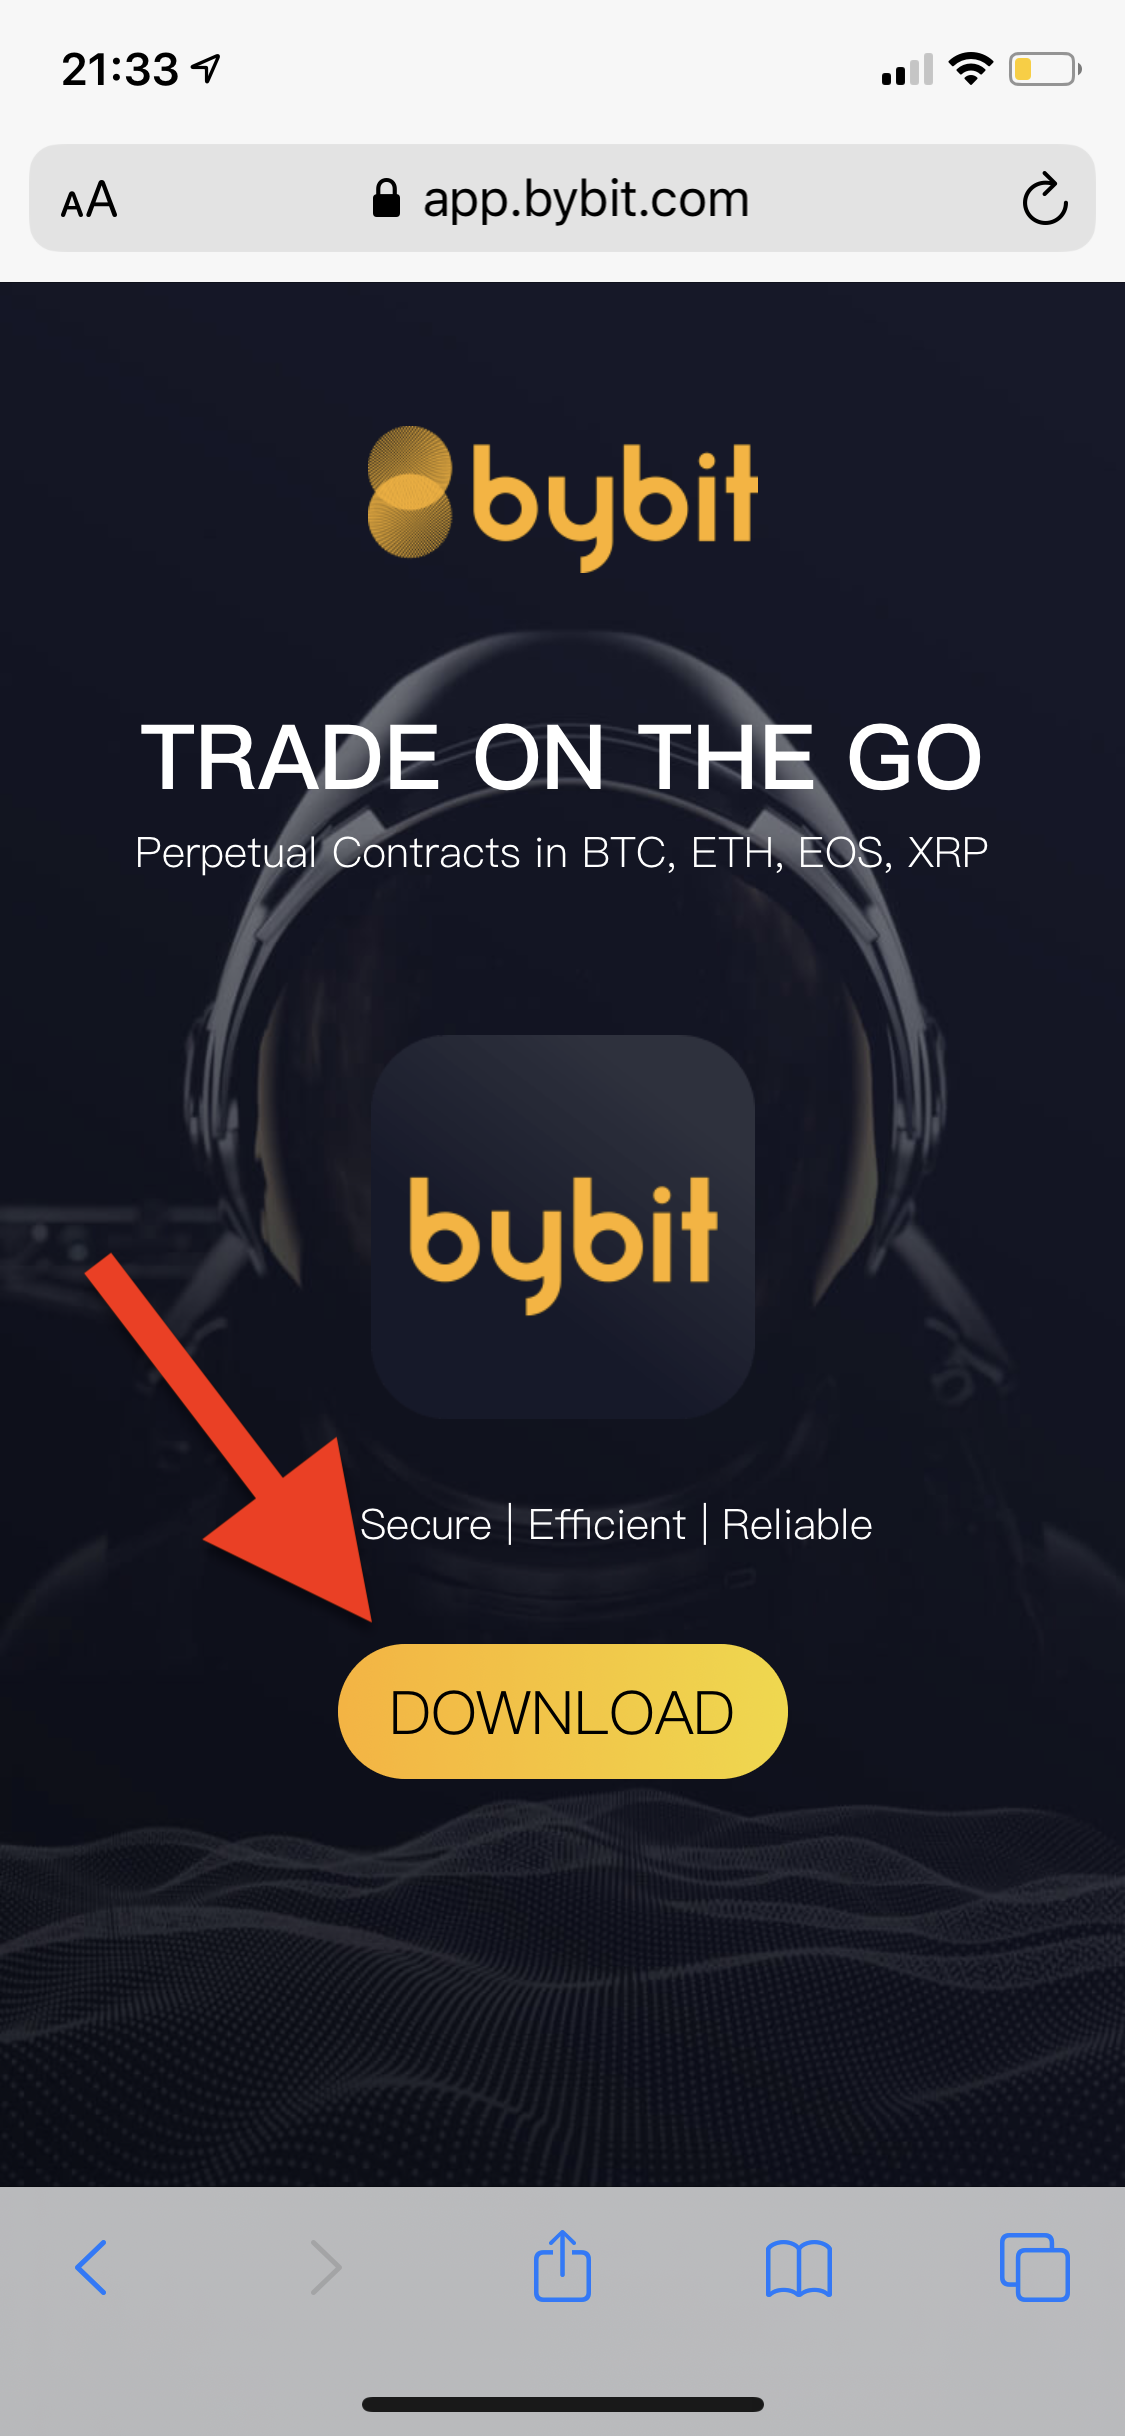 Download Bybit Mobile App → IOS, Android & Google Play